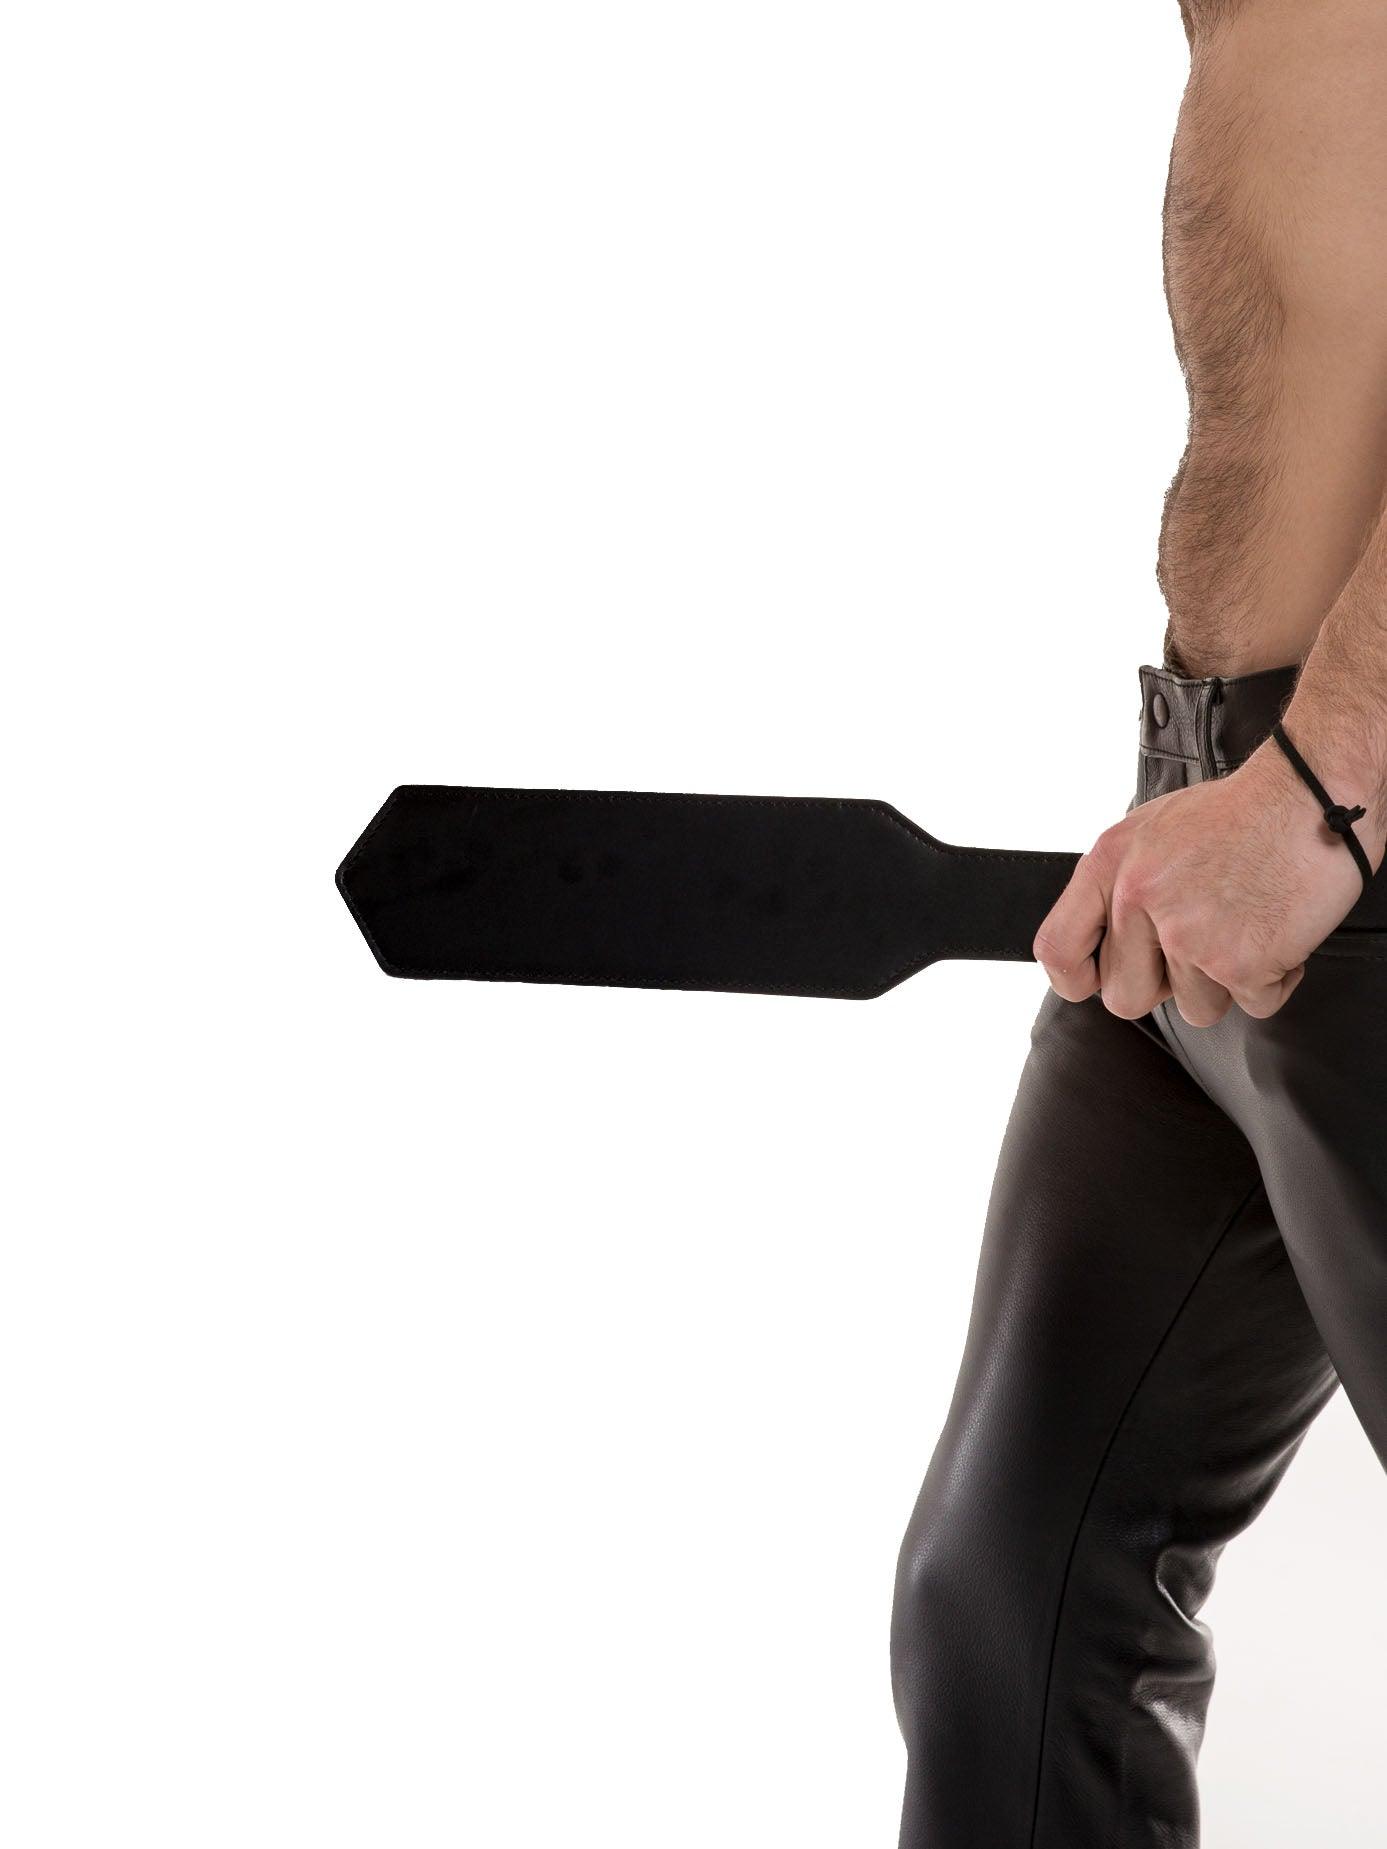 16-INCH LEATHER PADDLE - FullKit.com